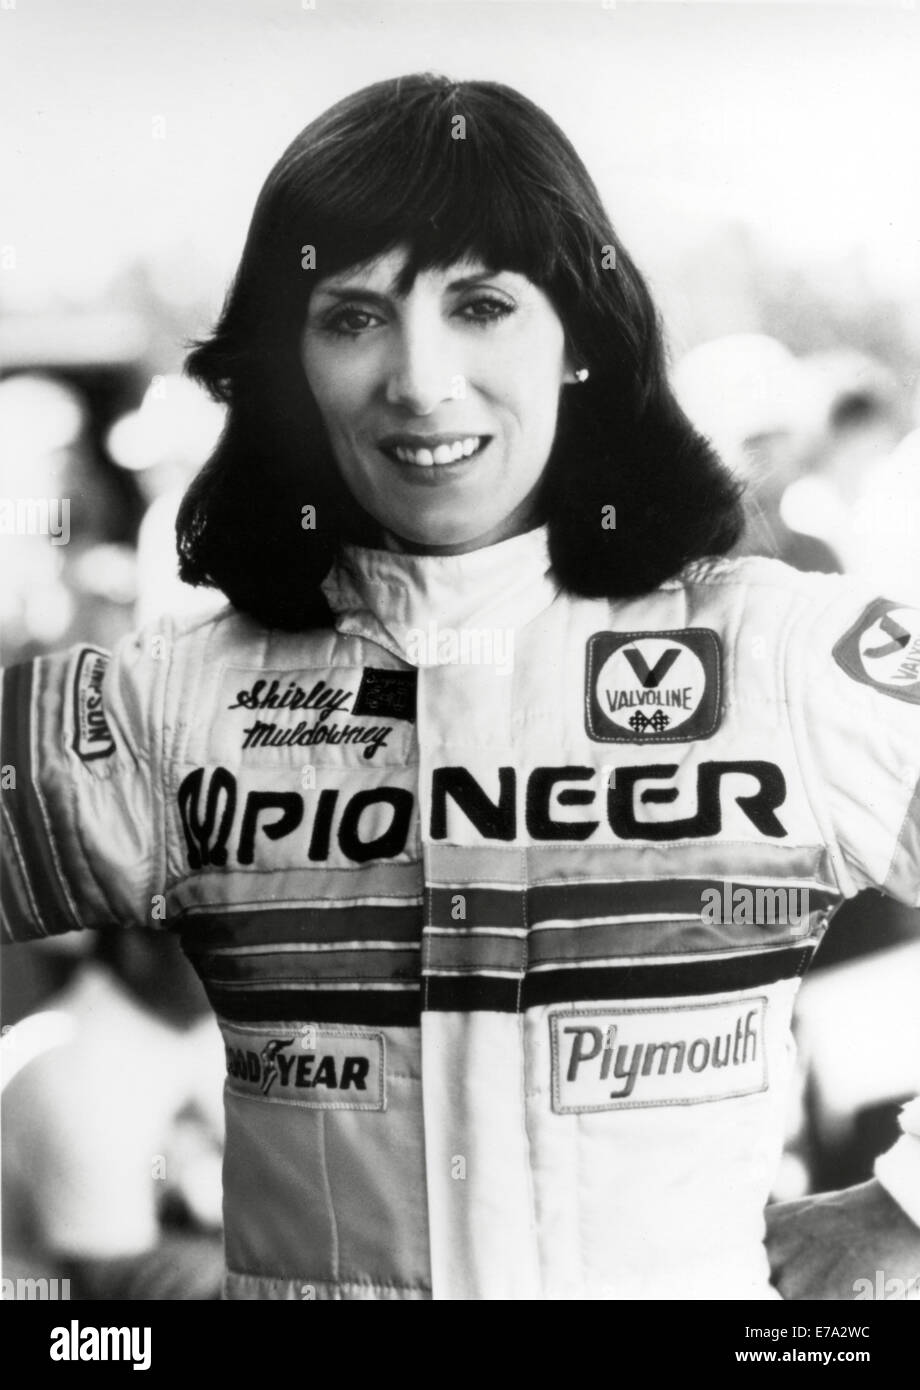 Shirley Muldowney, Professional Auto Racer, Portrait, circa early 1980's Stock Photo